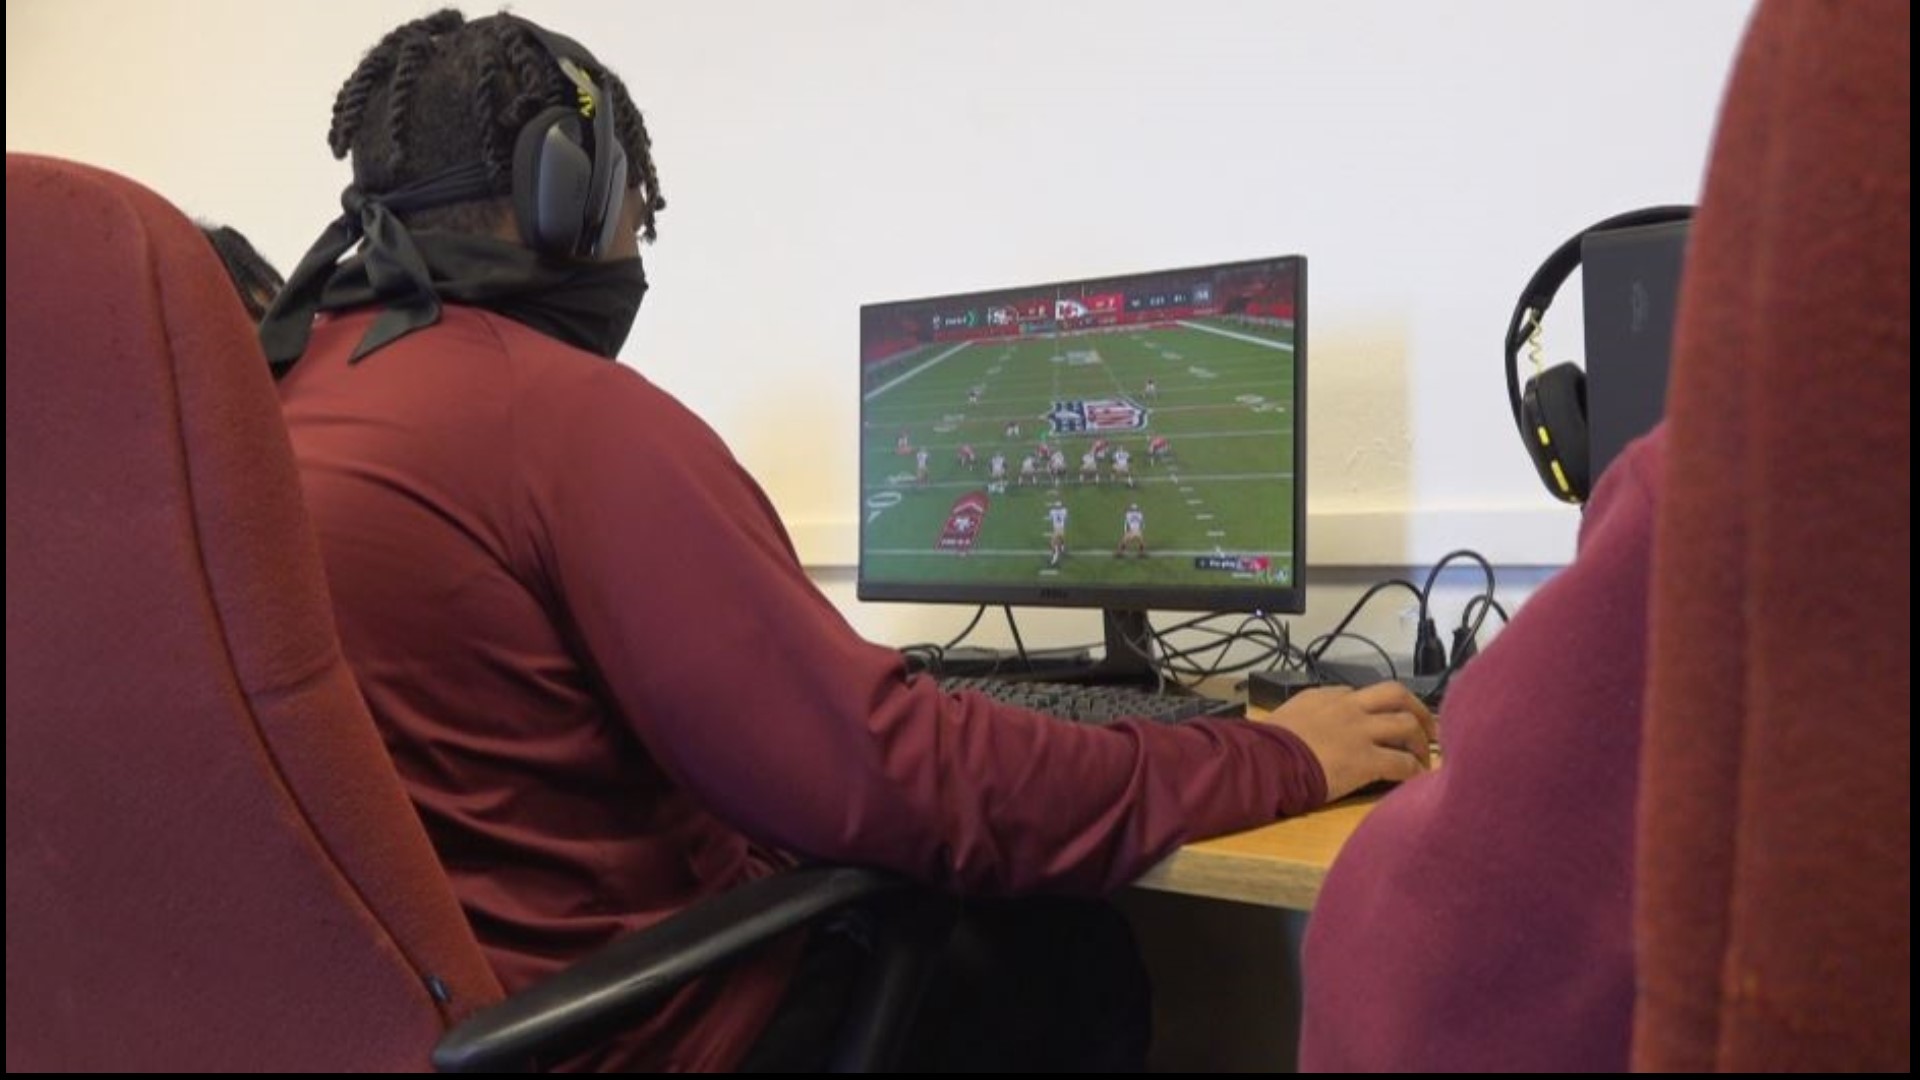 Lutheran North football coach brings first Esports program to North County